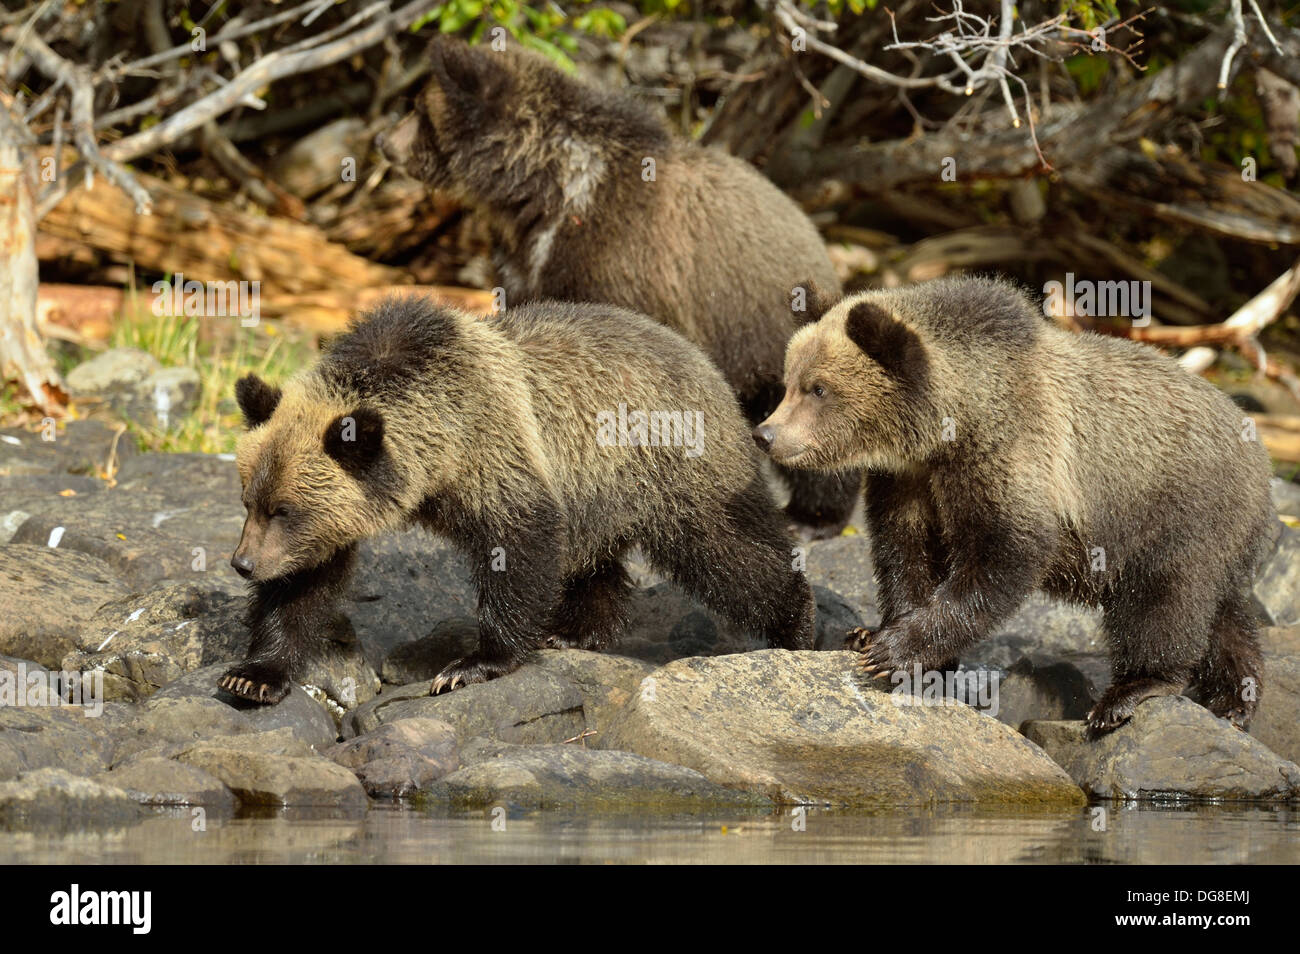 Grizzly bear, Ursus arctos, Cubs along the shoreline of a salmon river Chilcotin Wilderness BC Canada Stock Photo